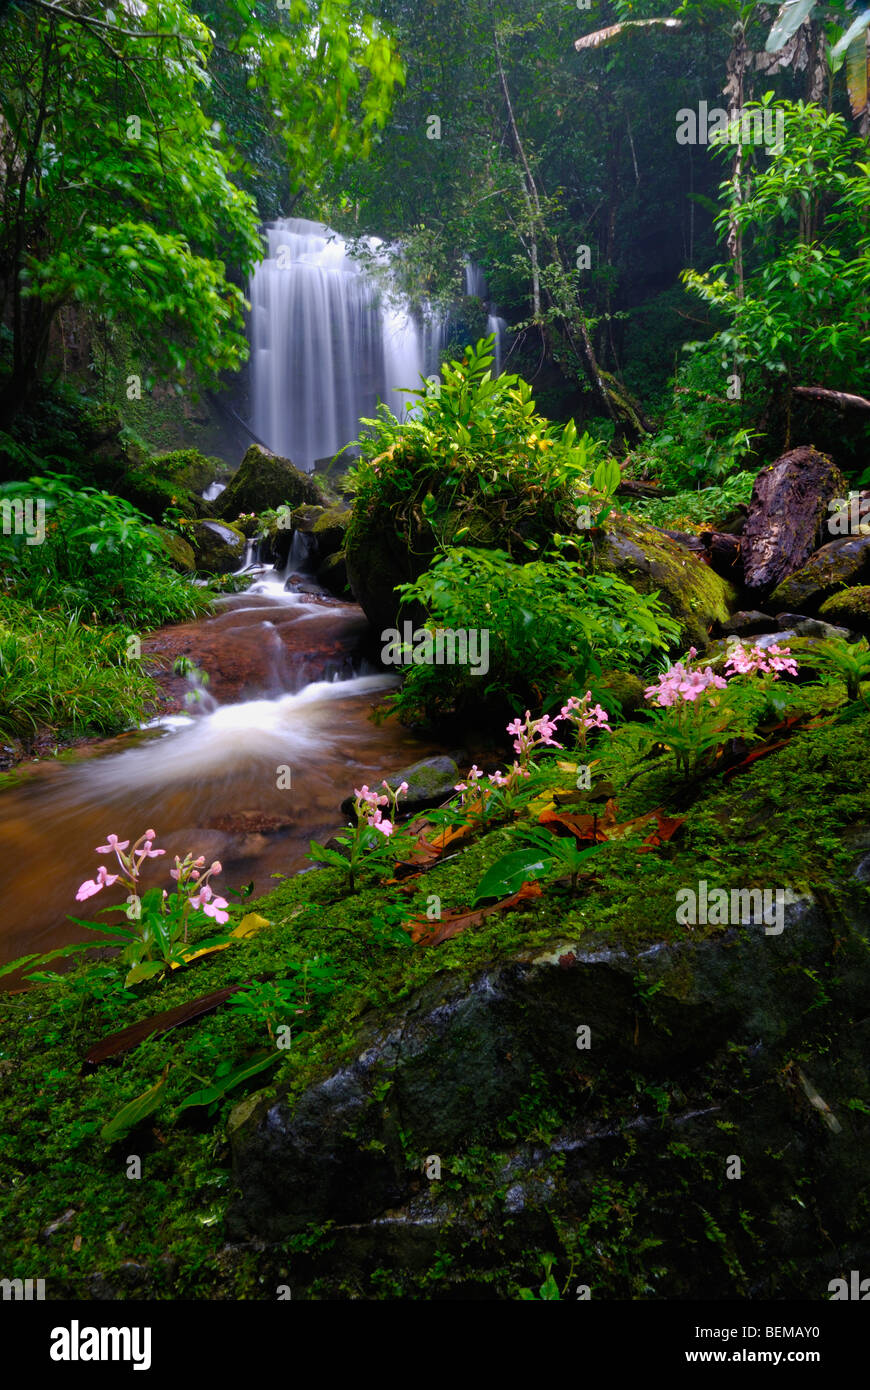 Wild orchid in front of a waterfall Stock Photo